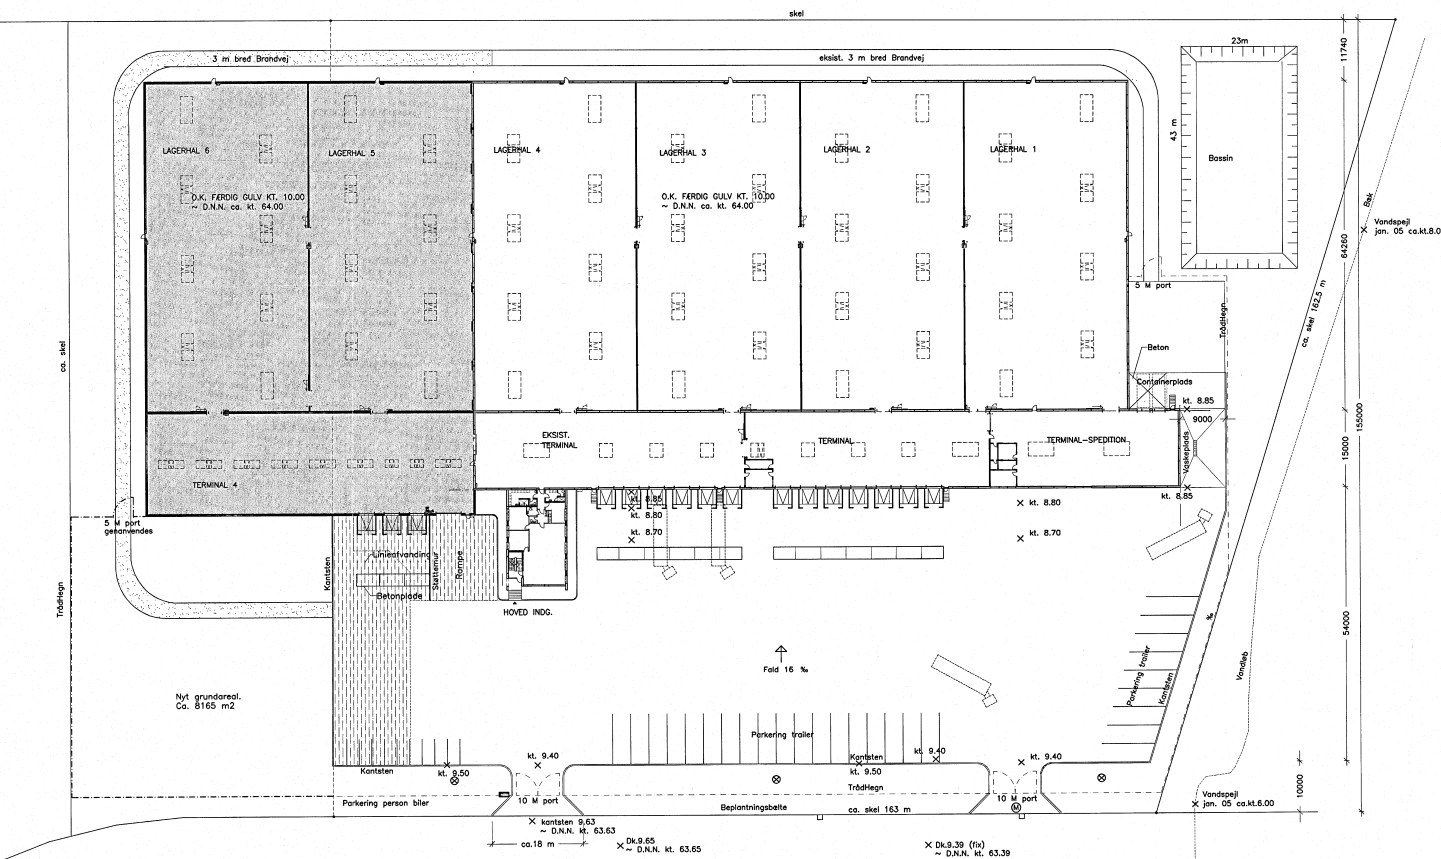 Hedensted DC I - Photos and floorplans